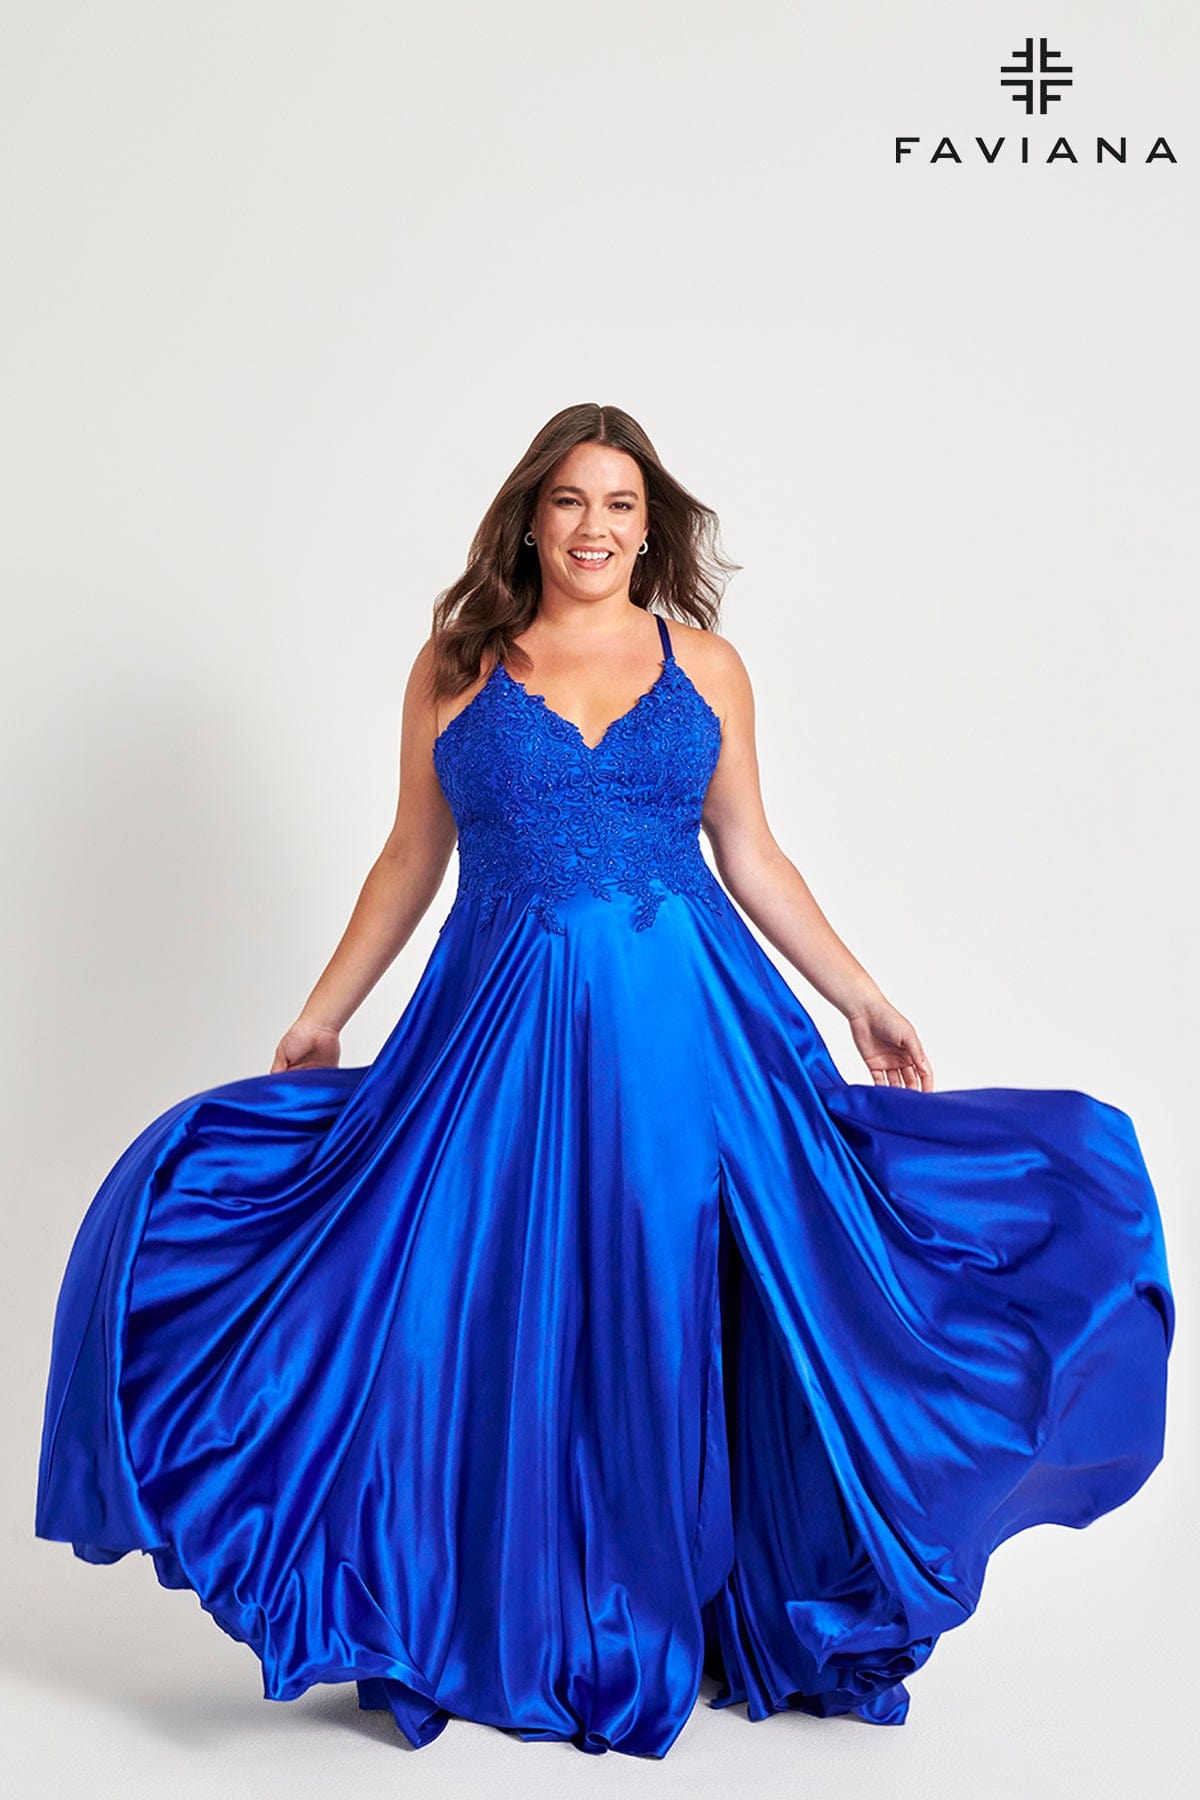 Royal Blue Plus Size Long Flowy Prom Dress With Lace Bustier And Corset Back